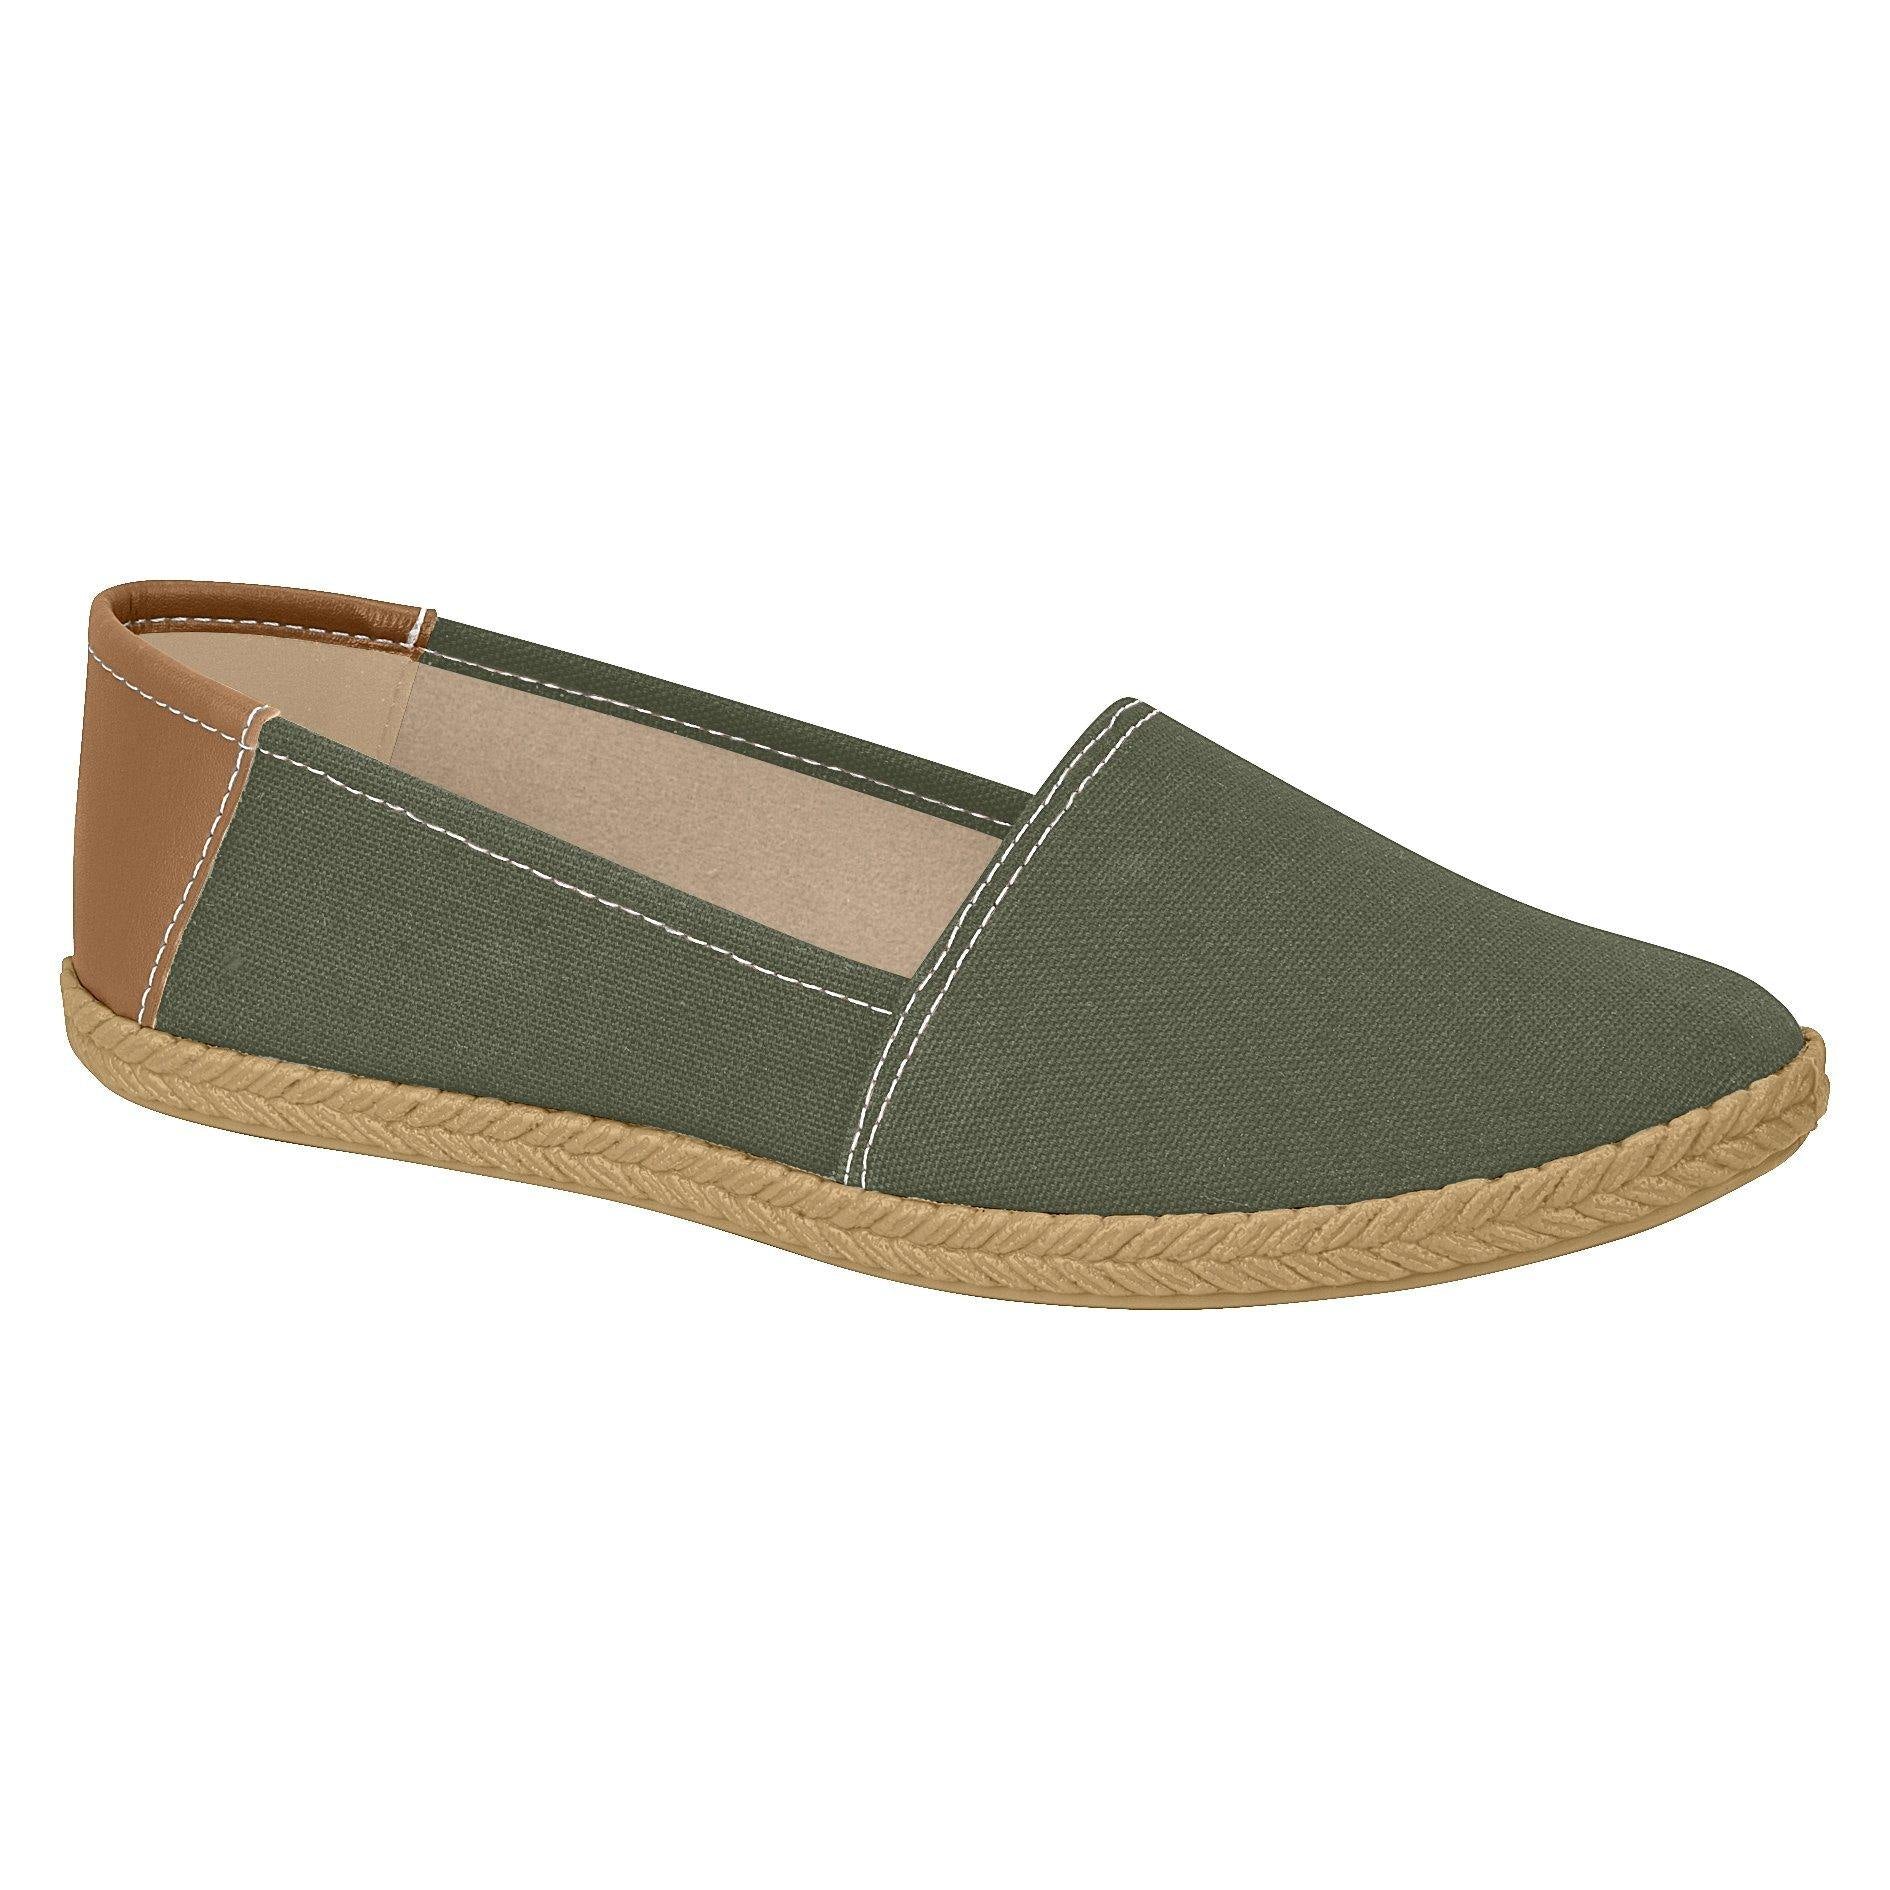 Moleca 5287-246 Canvas Flat in Military Green